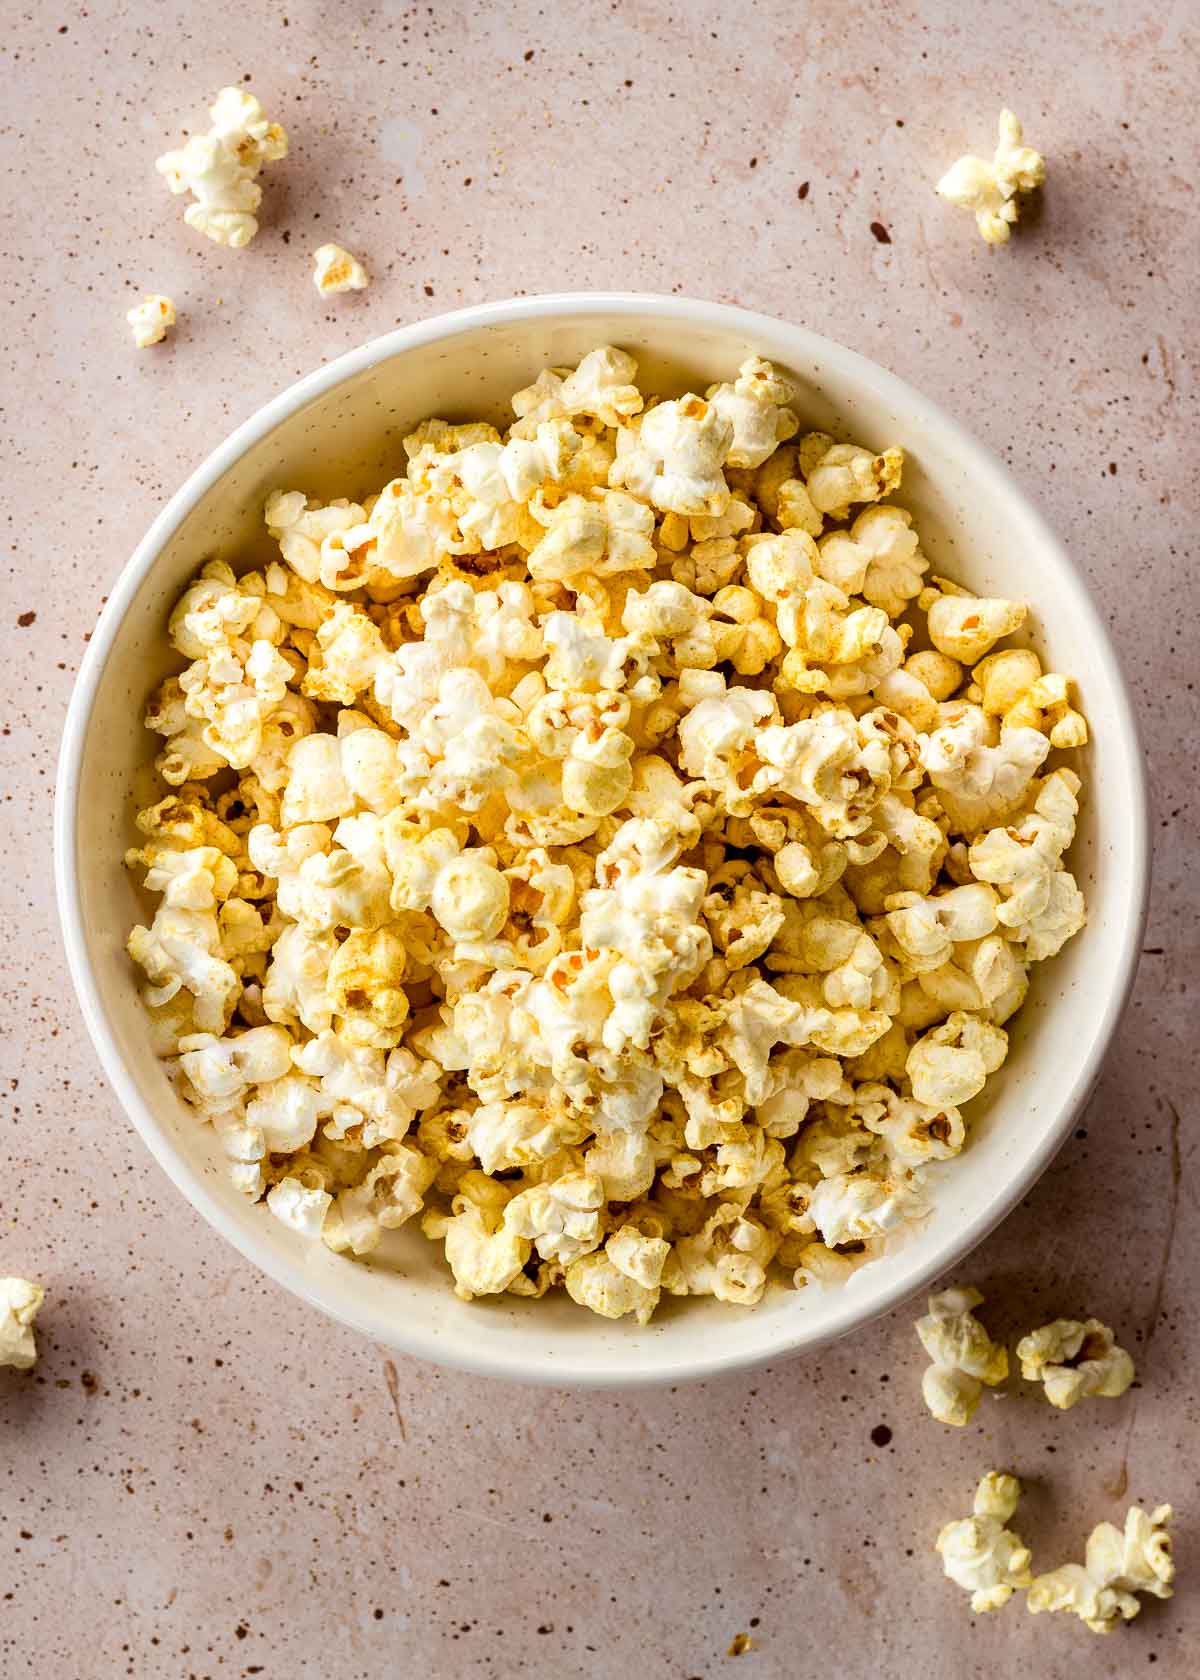 Vegan popcorn in a white bowl, with a dairy free cheese seasoning.